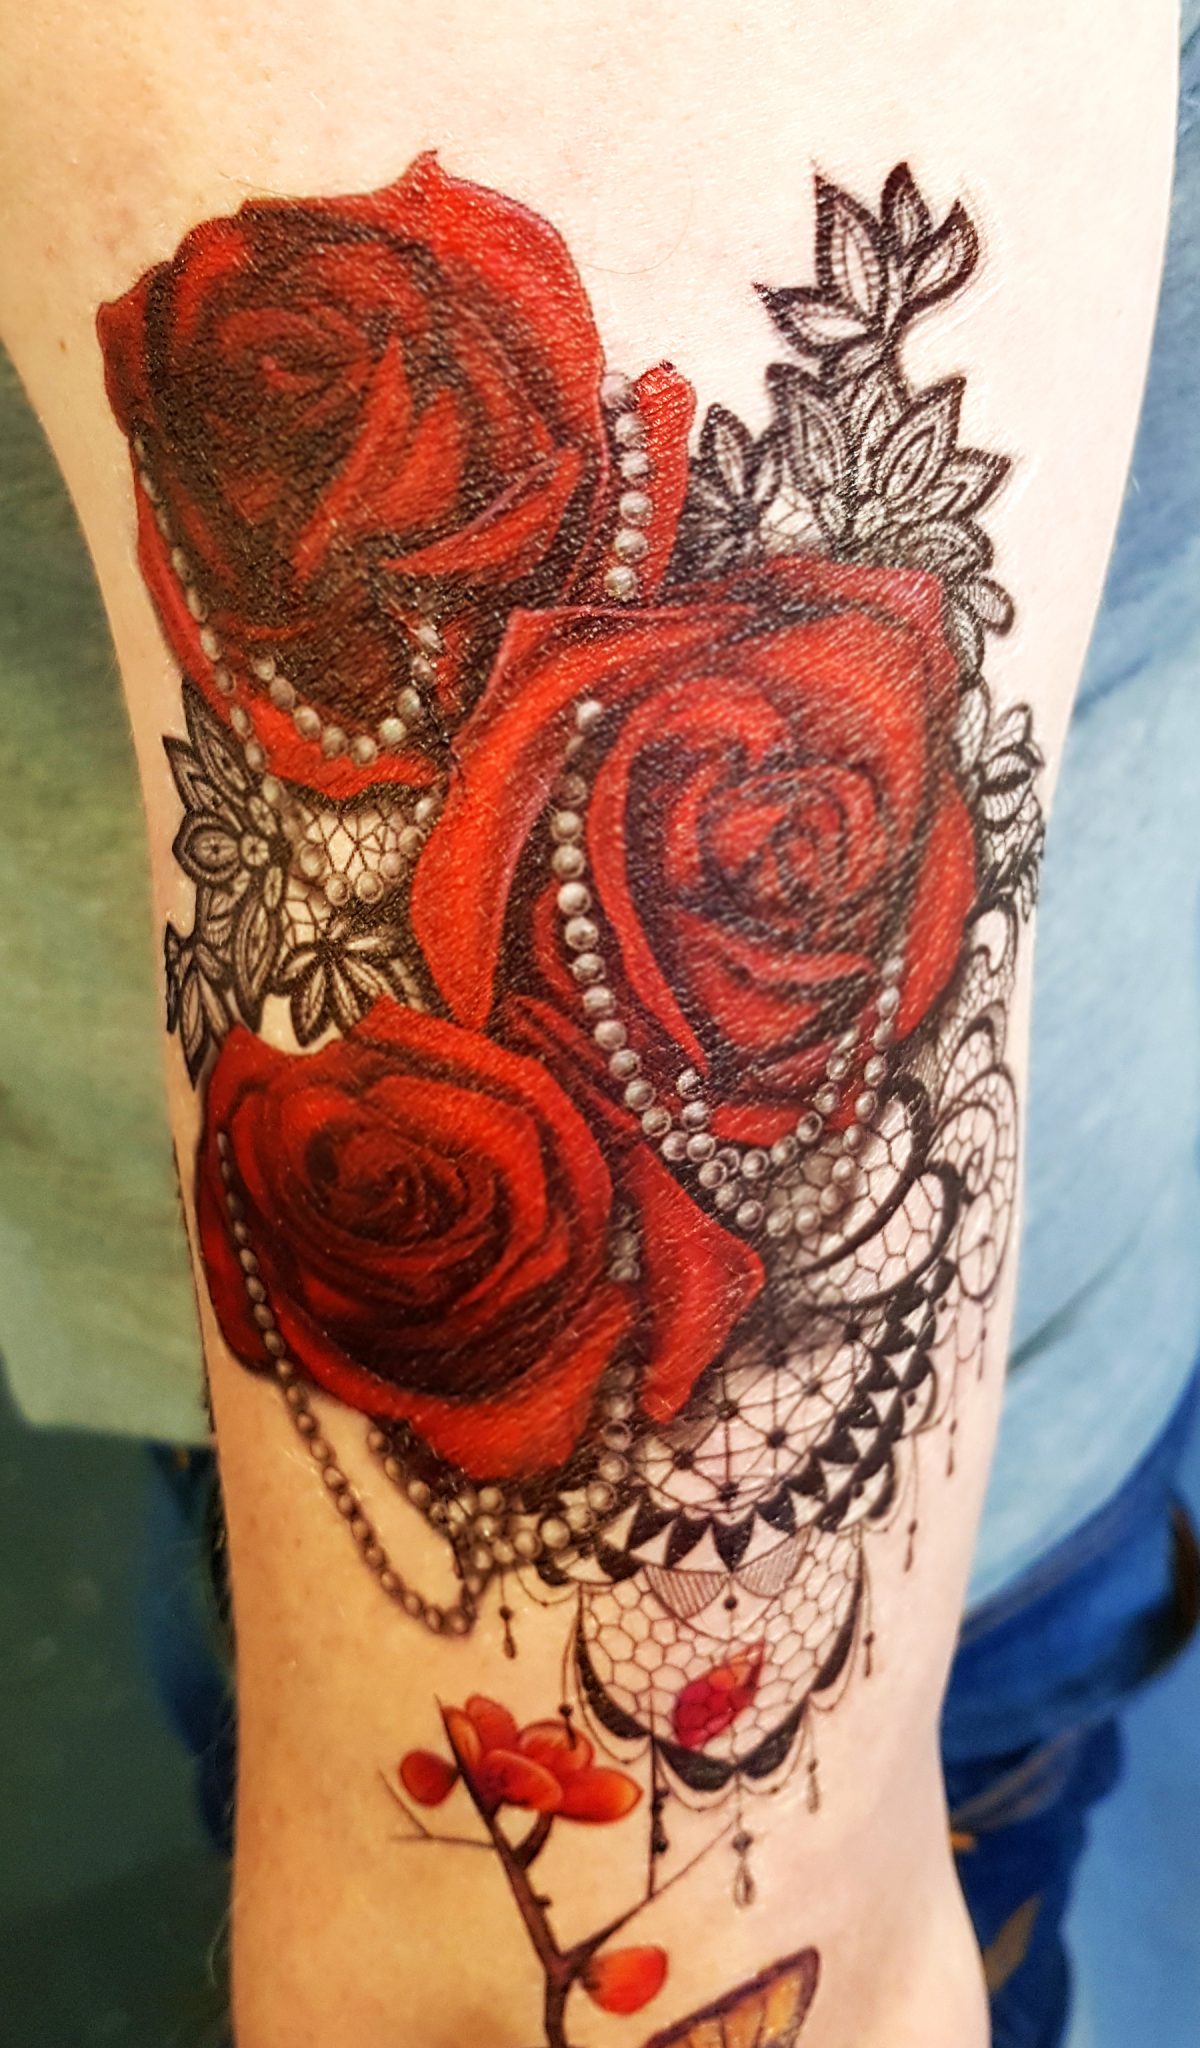 3 x Realistic rose with lace tattoo design digital download   TattooDesignStock